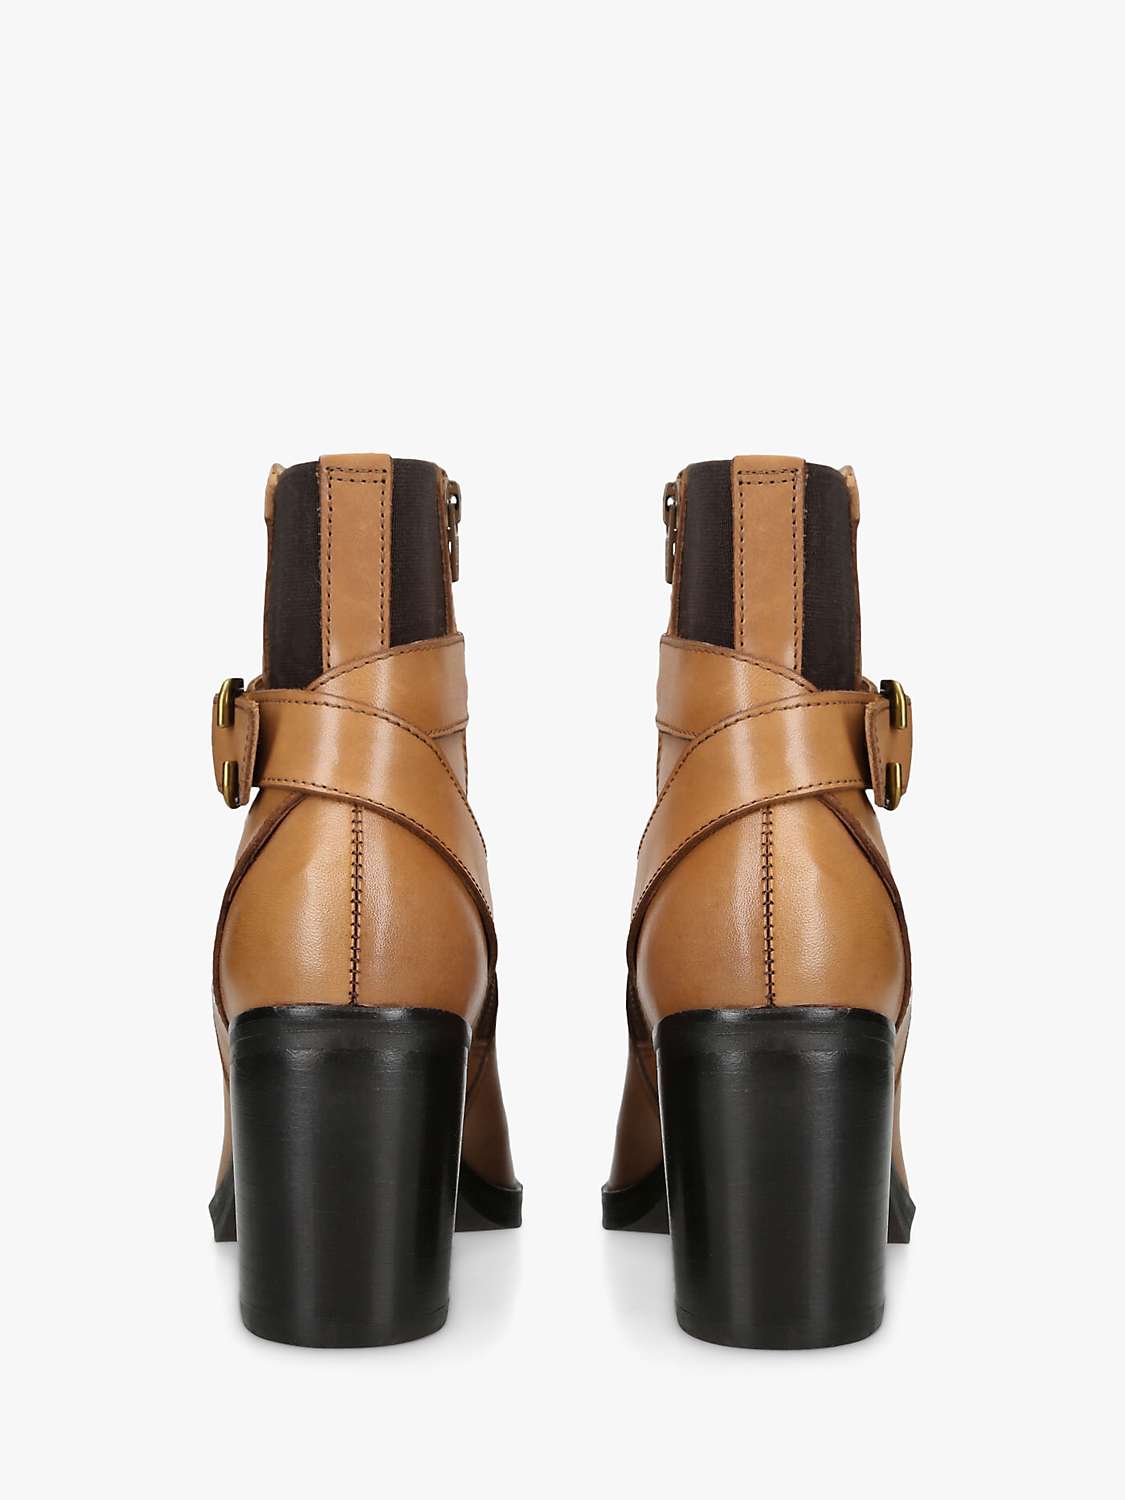 Buy Kurt Geiger London Hampstead Leather Ankle Boots, Tan Online at johnlewis.com